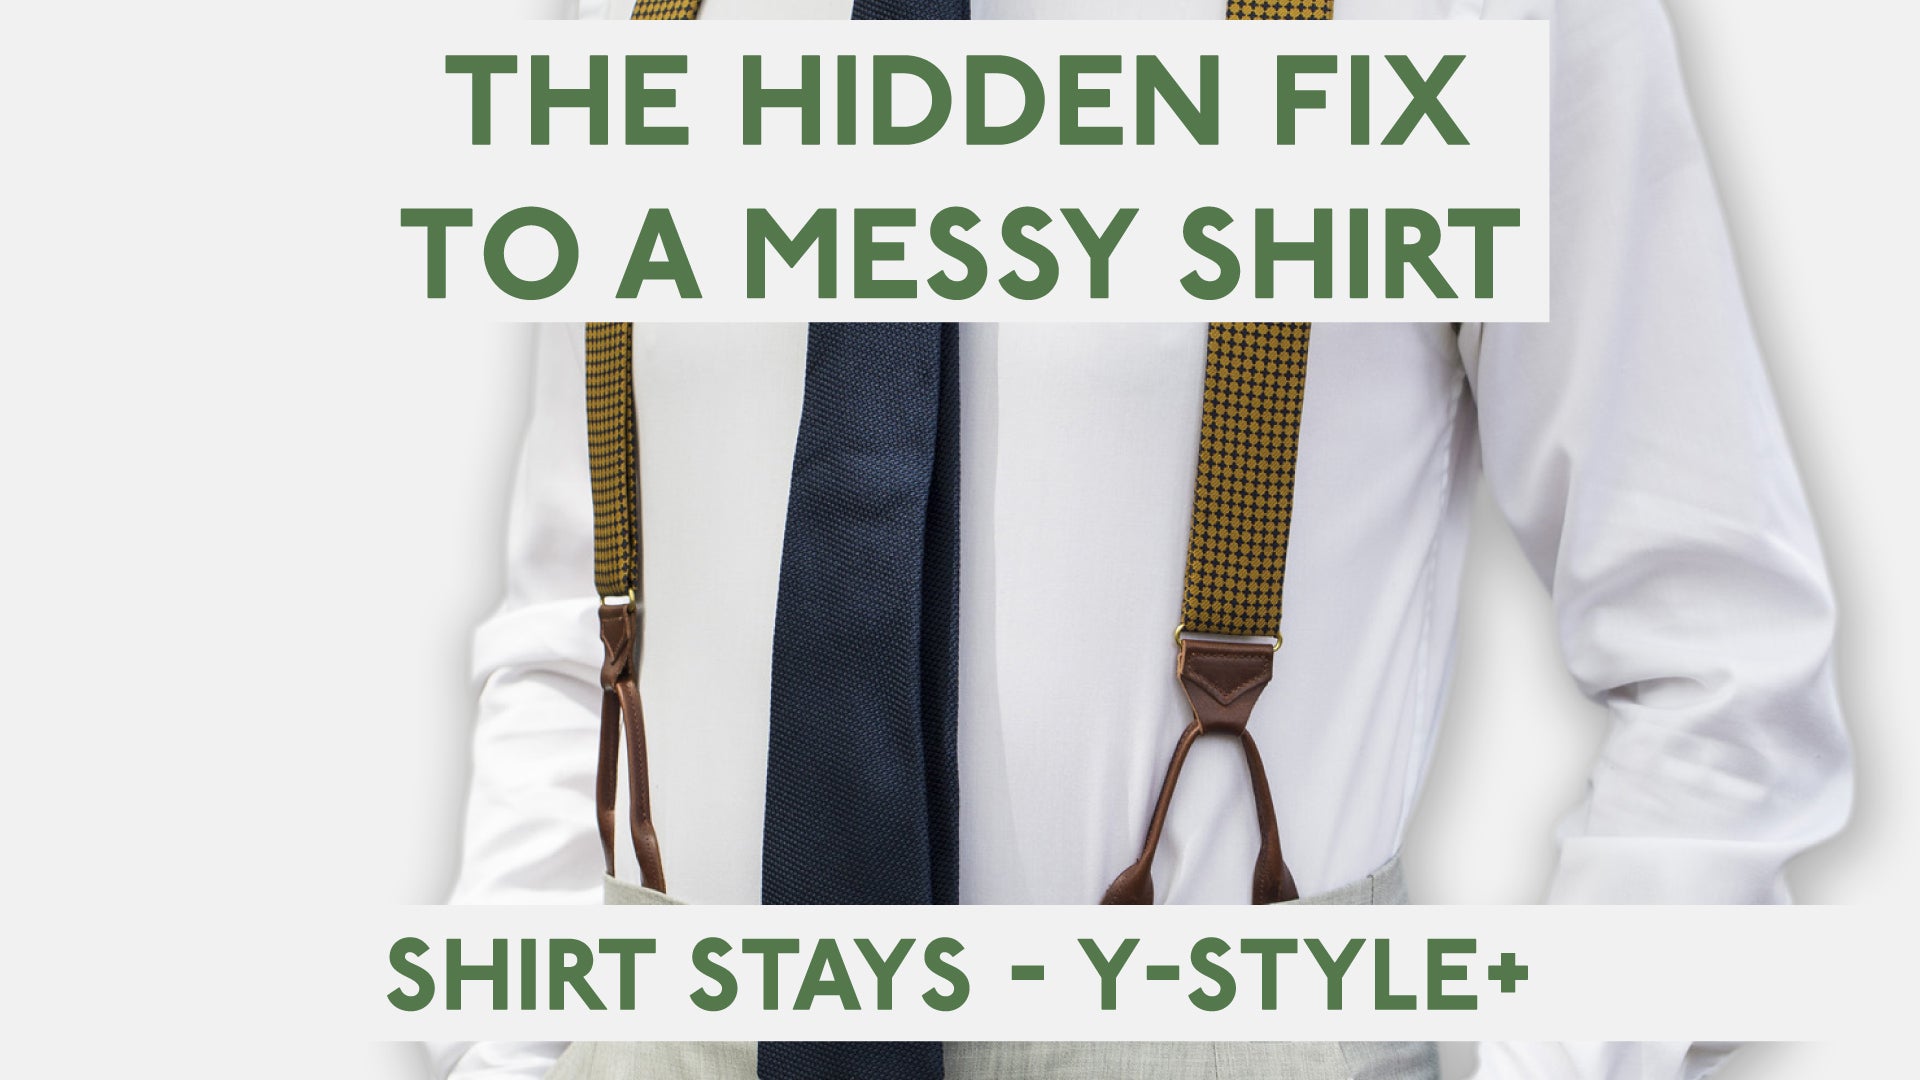 The Hidden Fix to a Messy Shirt - Our Shirt Stays Y Style +